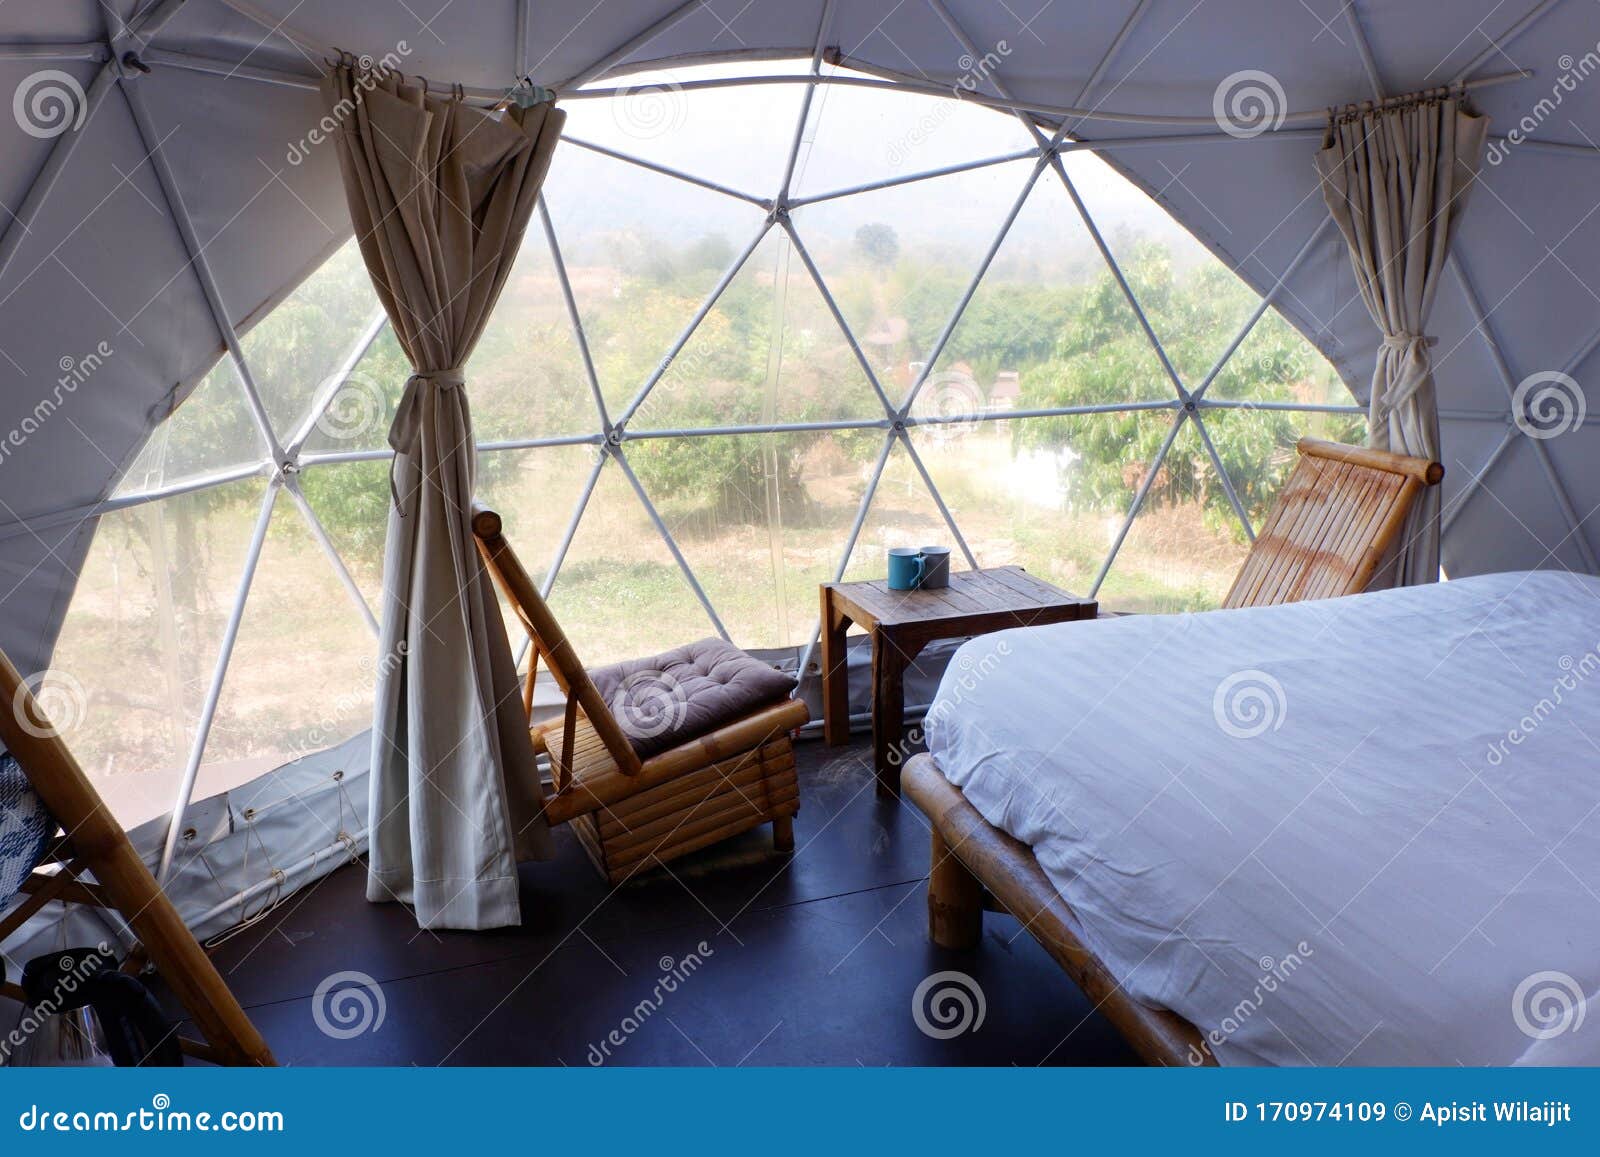 interior inside geodesic dome tents in asia.